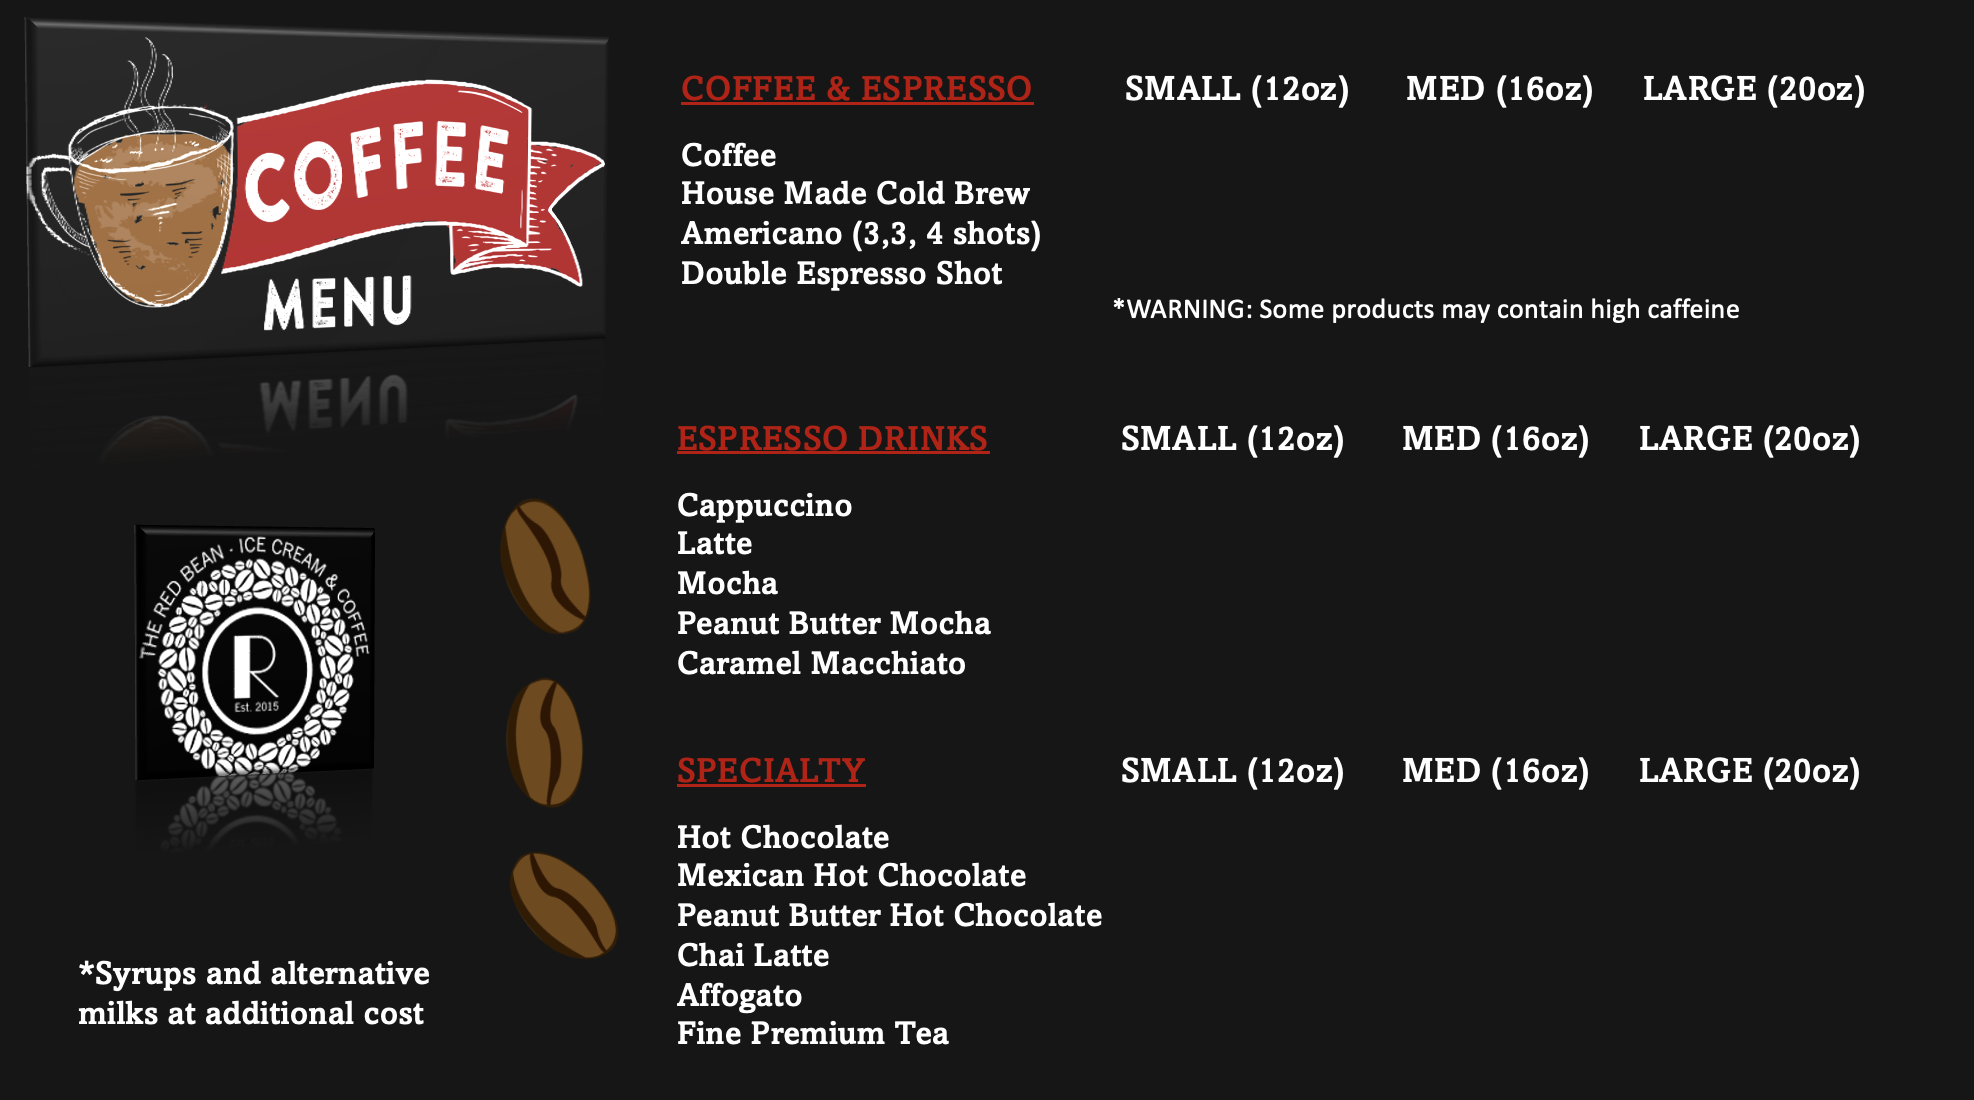 This is the coffee and drinks menu